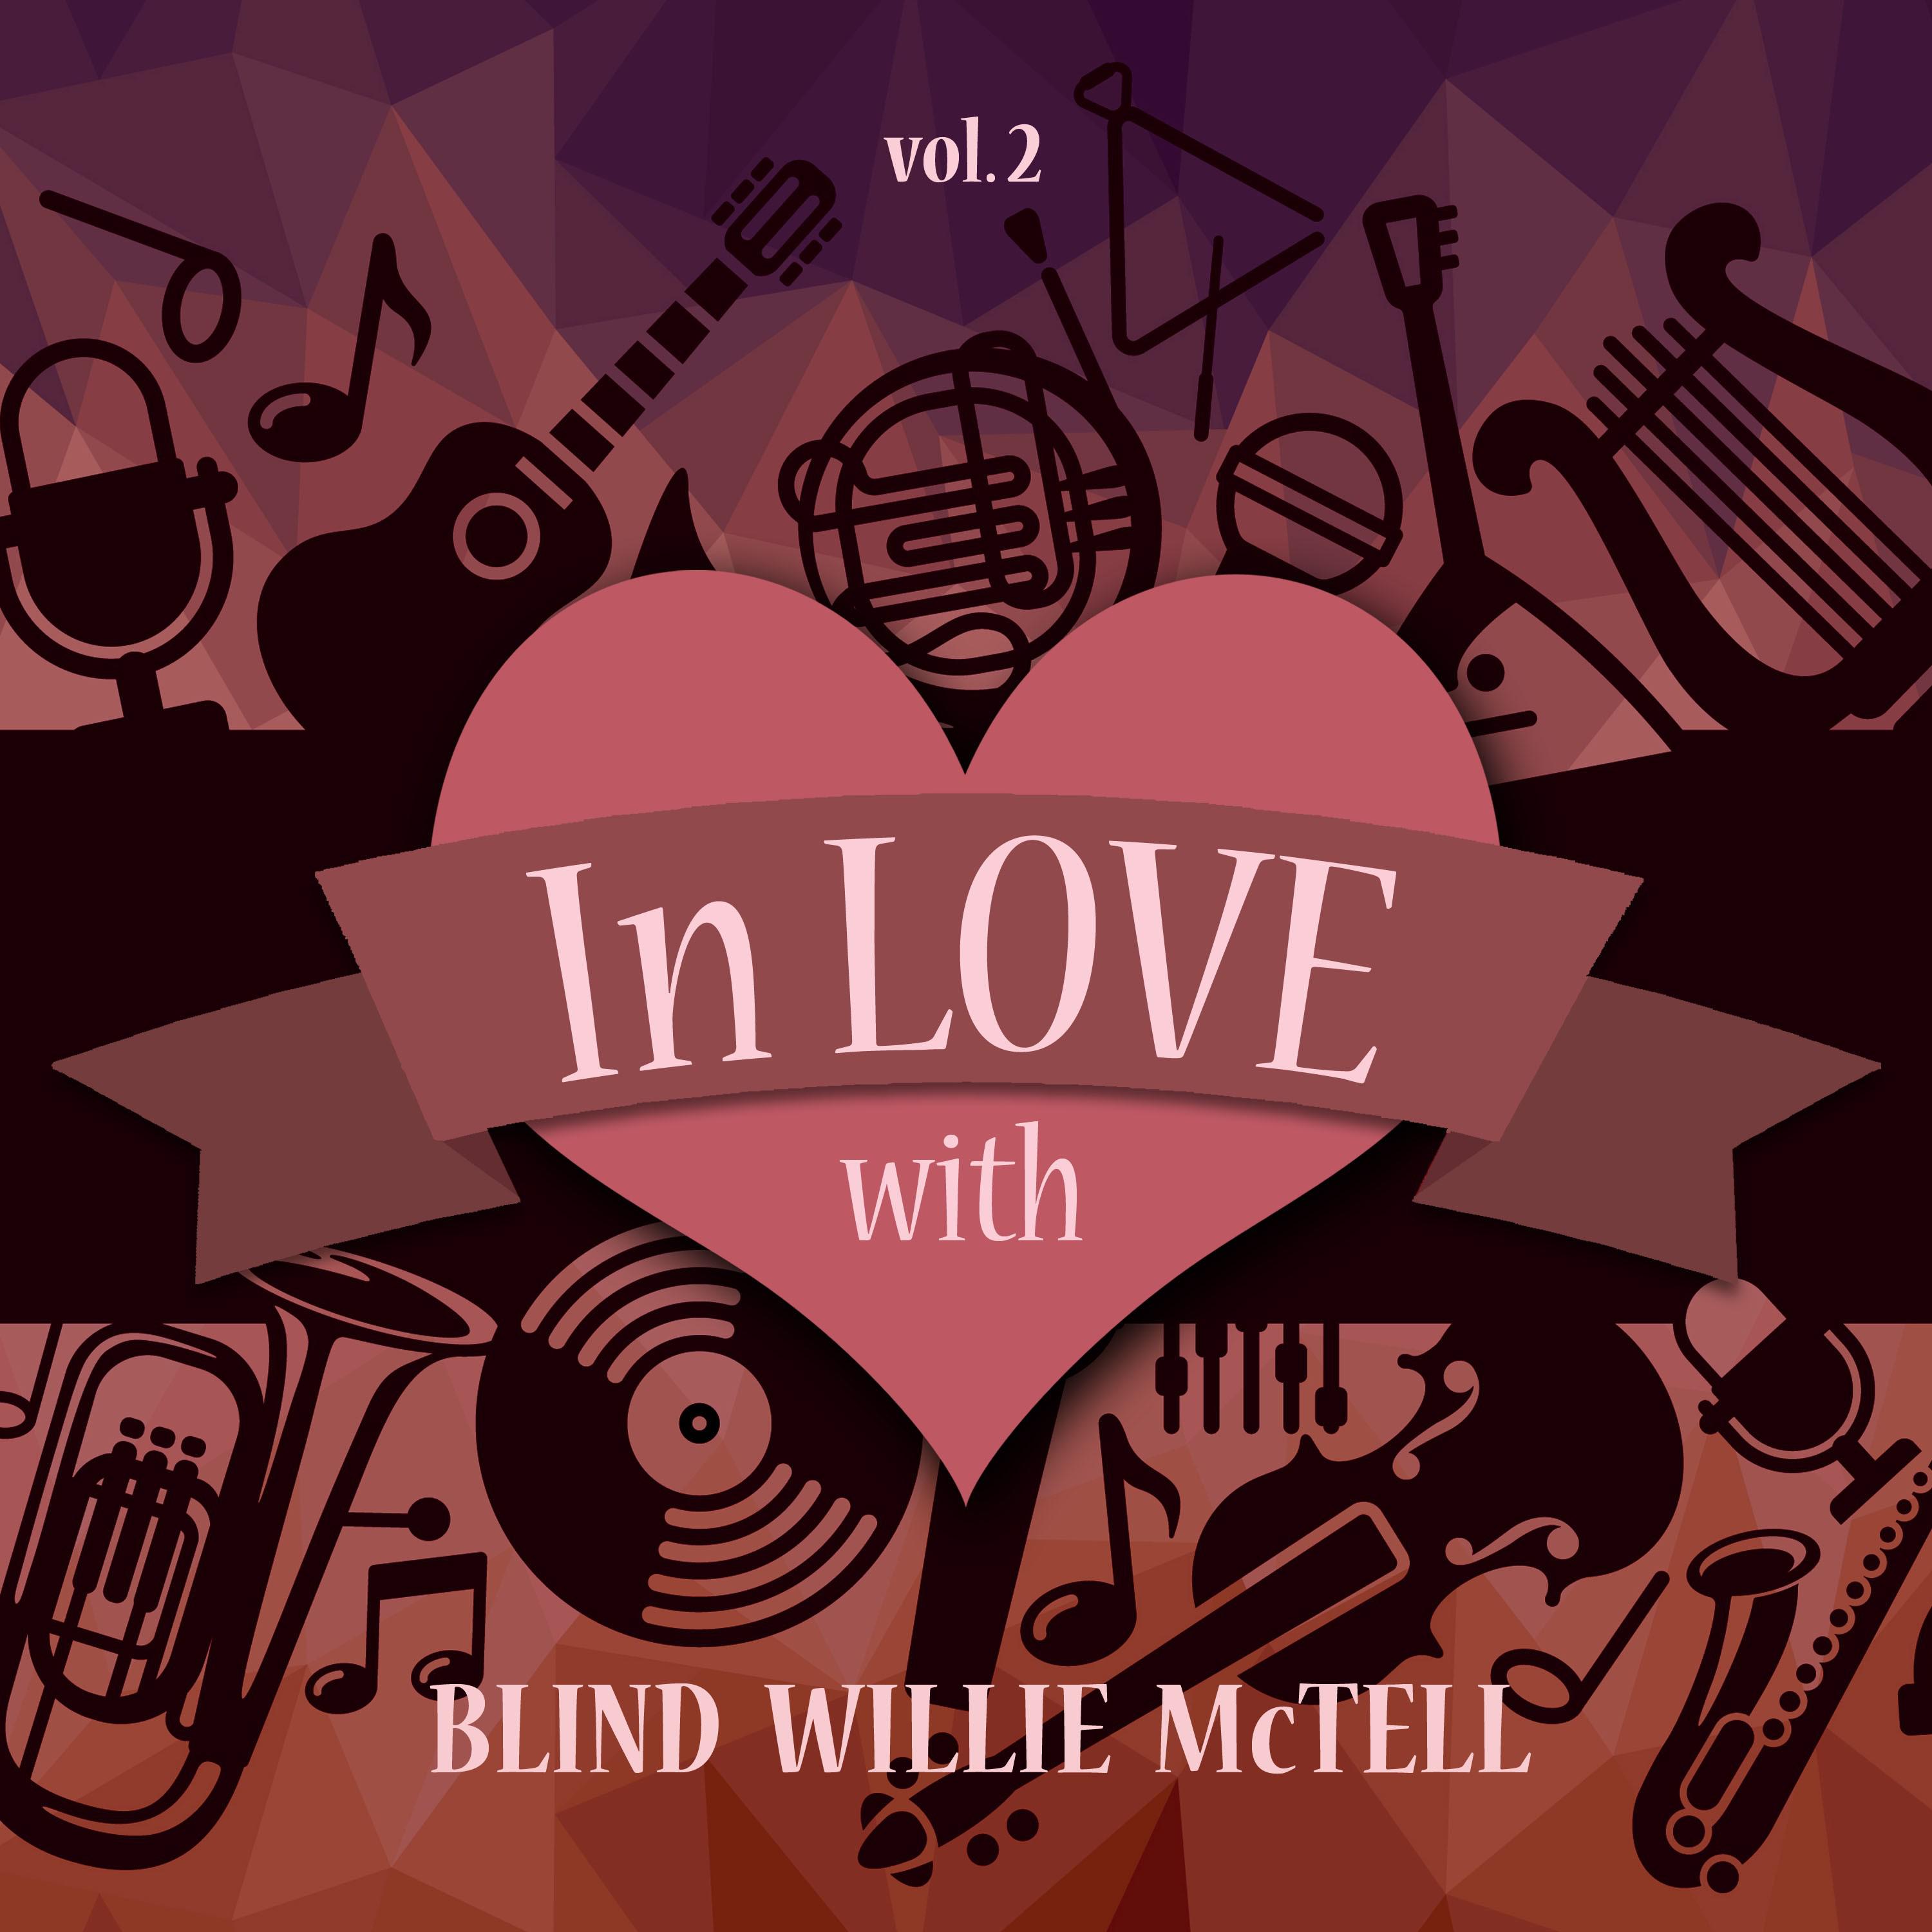 In Love with Blind Willie Mctell, Vol. 2